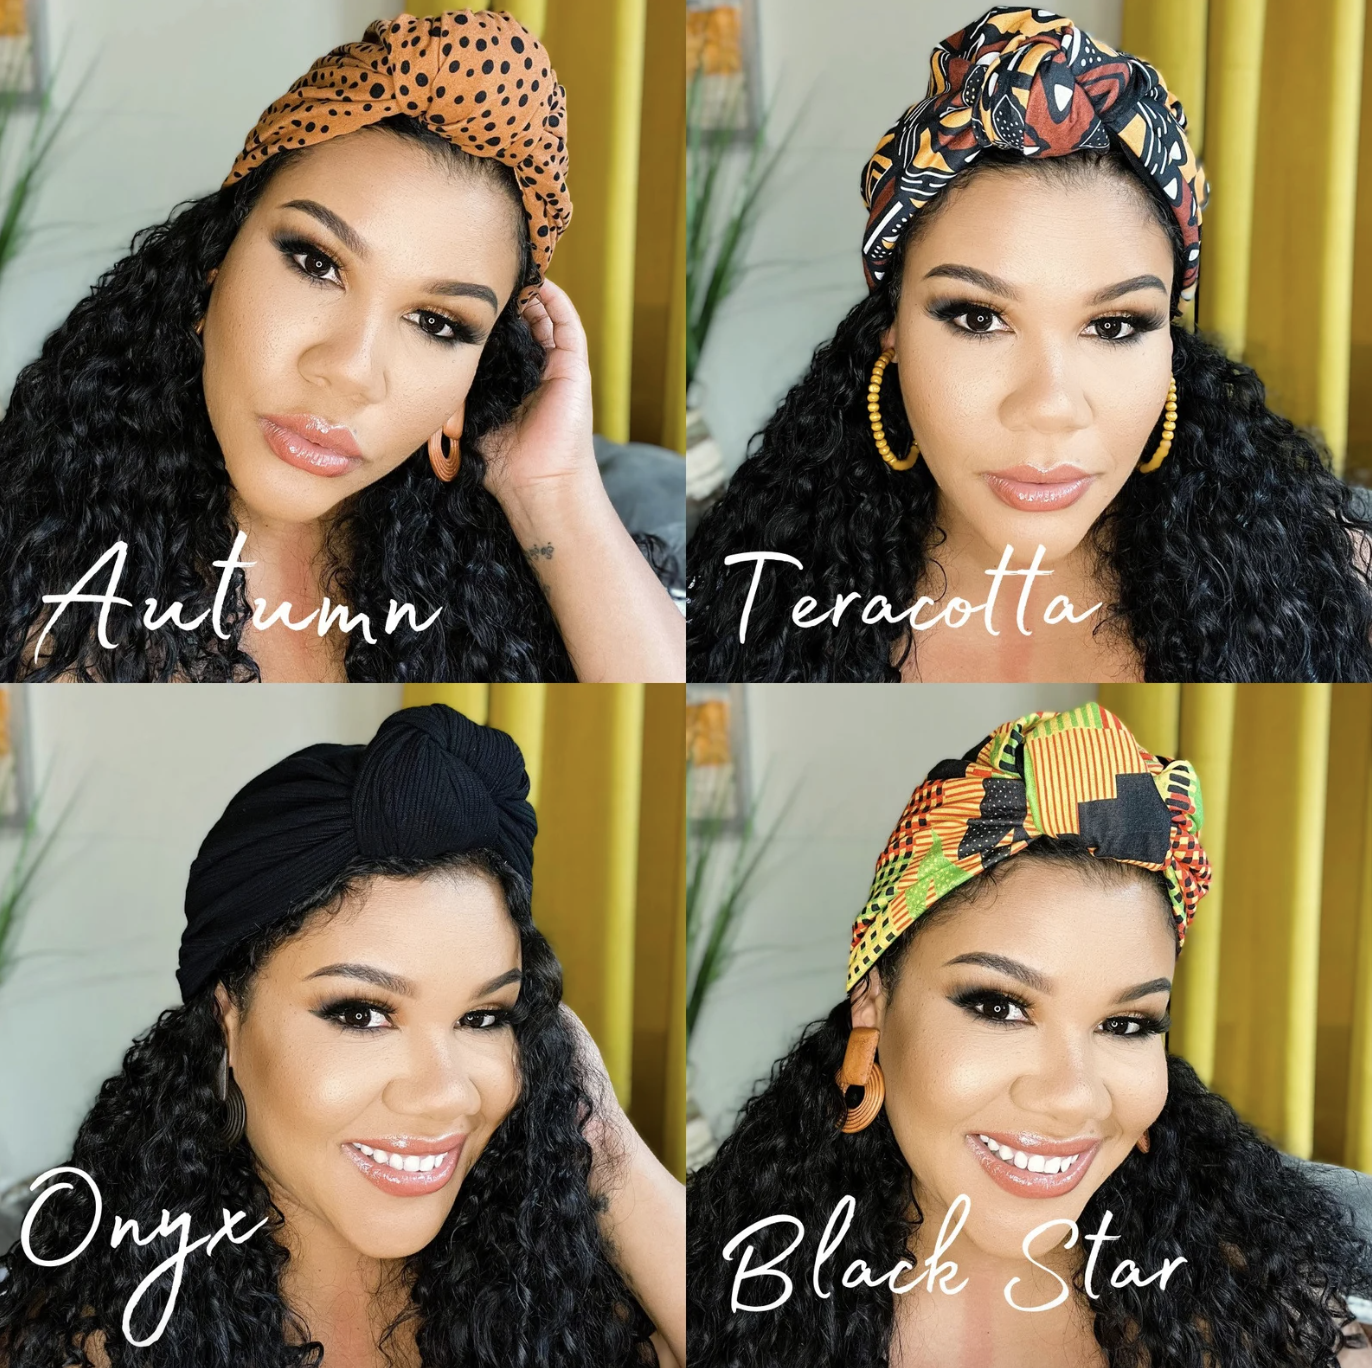 A model in four different colors and prints of the head wrap